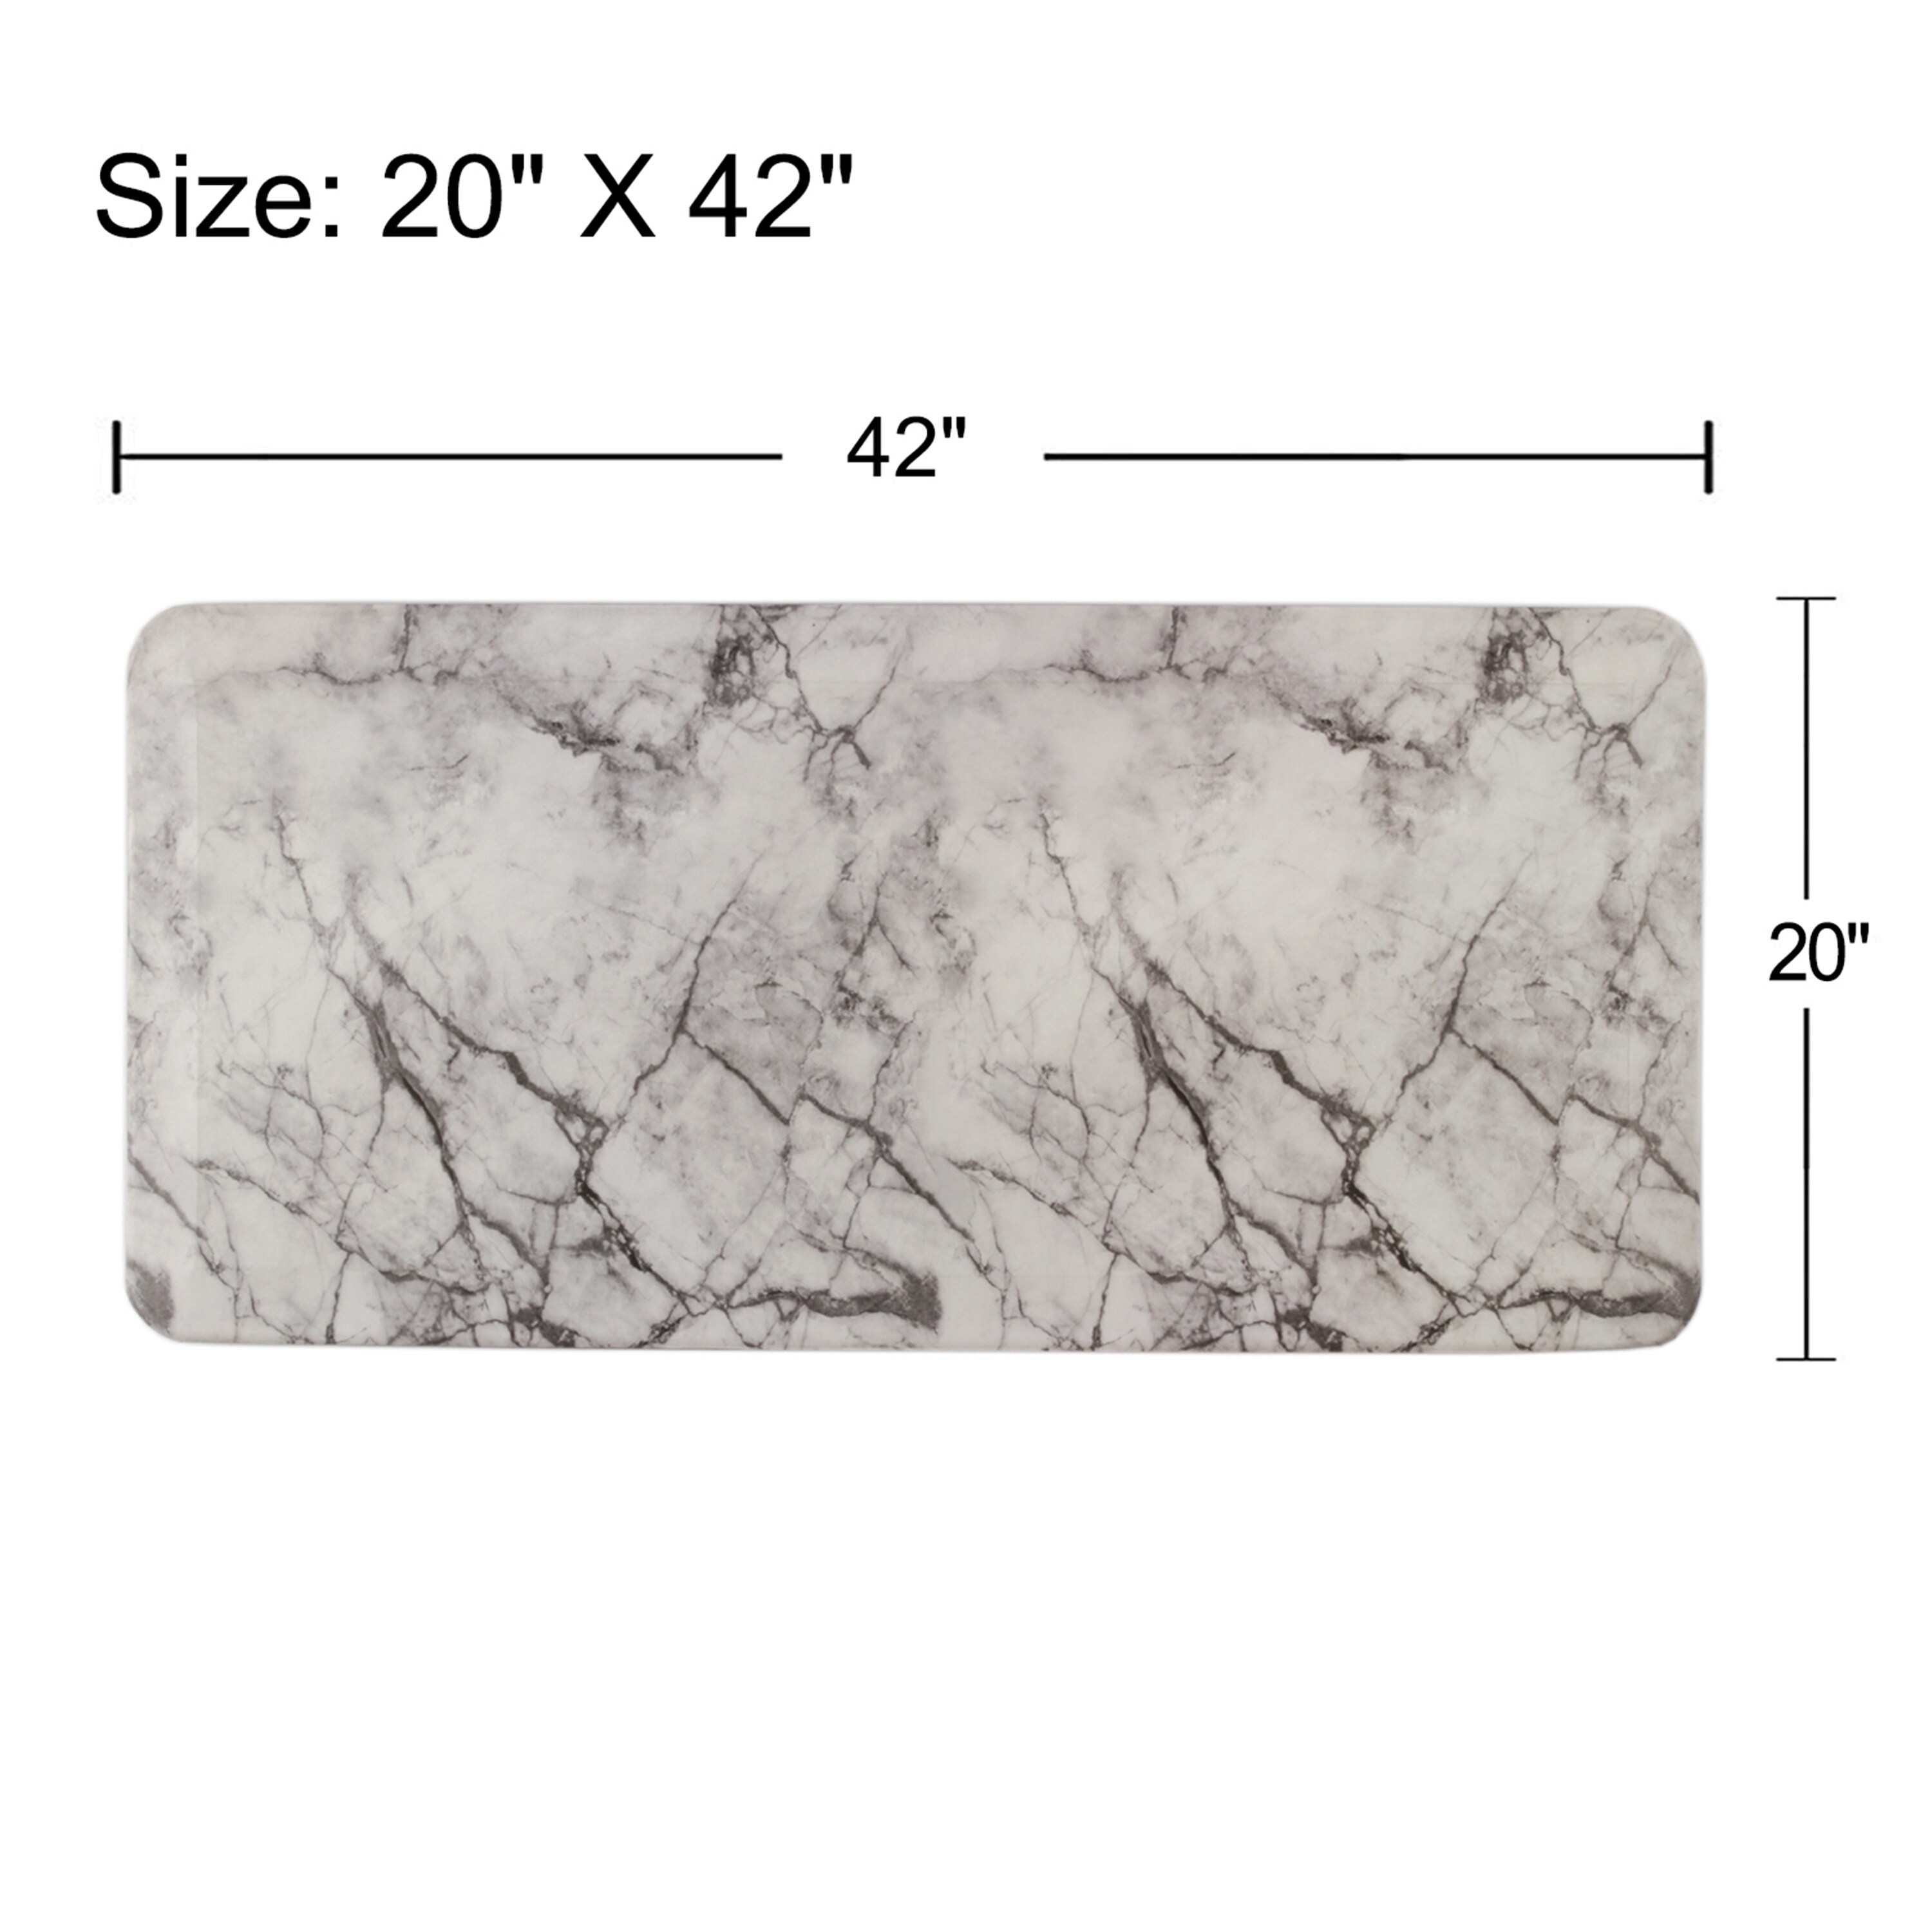 https://ak1.ostkcdn.com/images/products/is/images/direct/8dd7eb79cfe95d24ec9fec8175d4f636b6093677/FRESHMINT-Anti-Fatigue-Marble-Print-Mats-%2C-Perfect-for-Kitchens-and-Standing-Desks-42-x-20-Inch.jpg